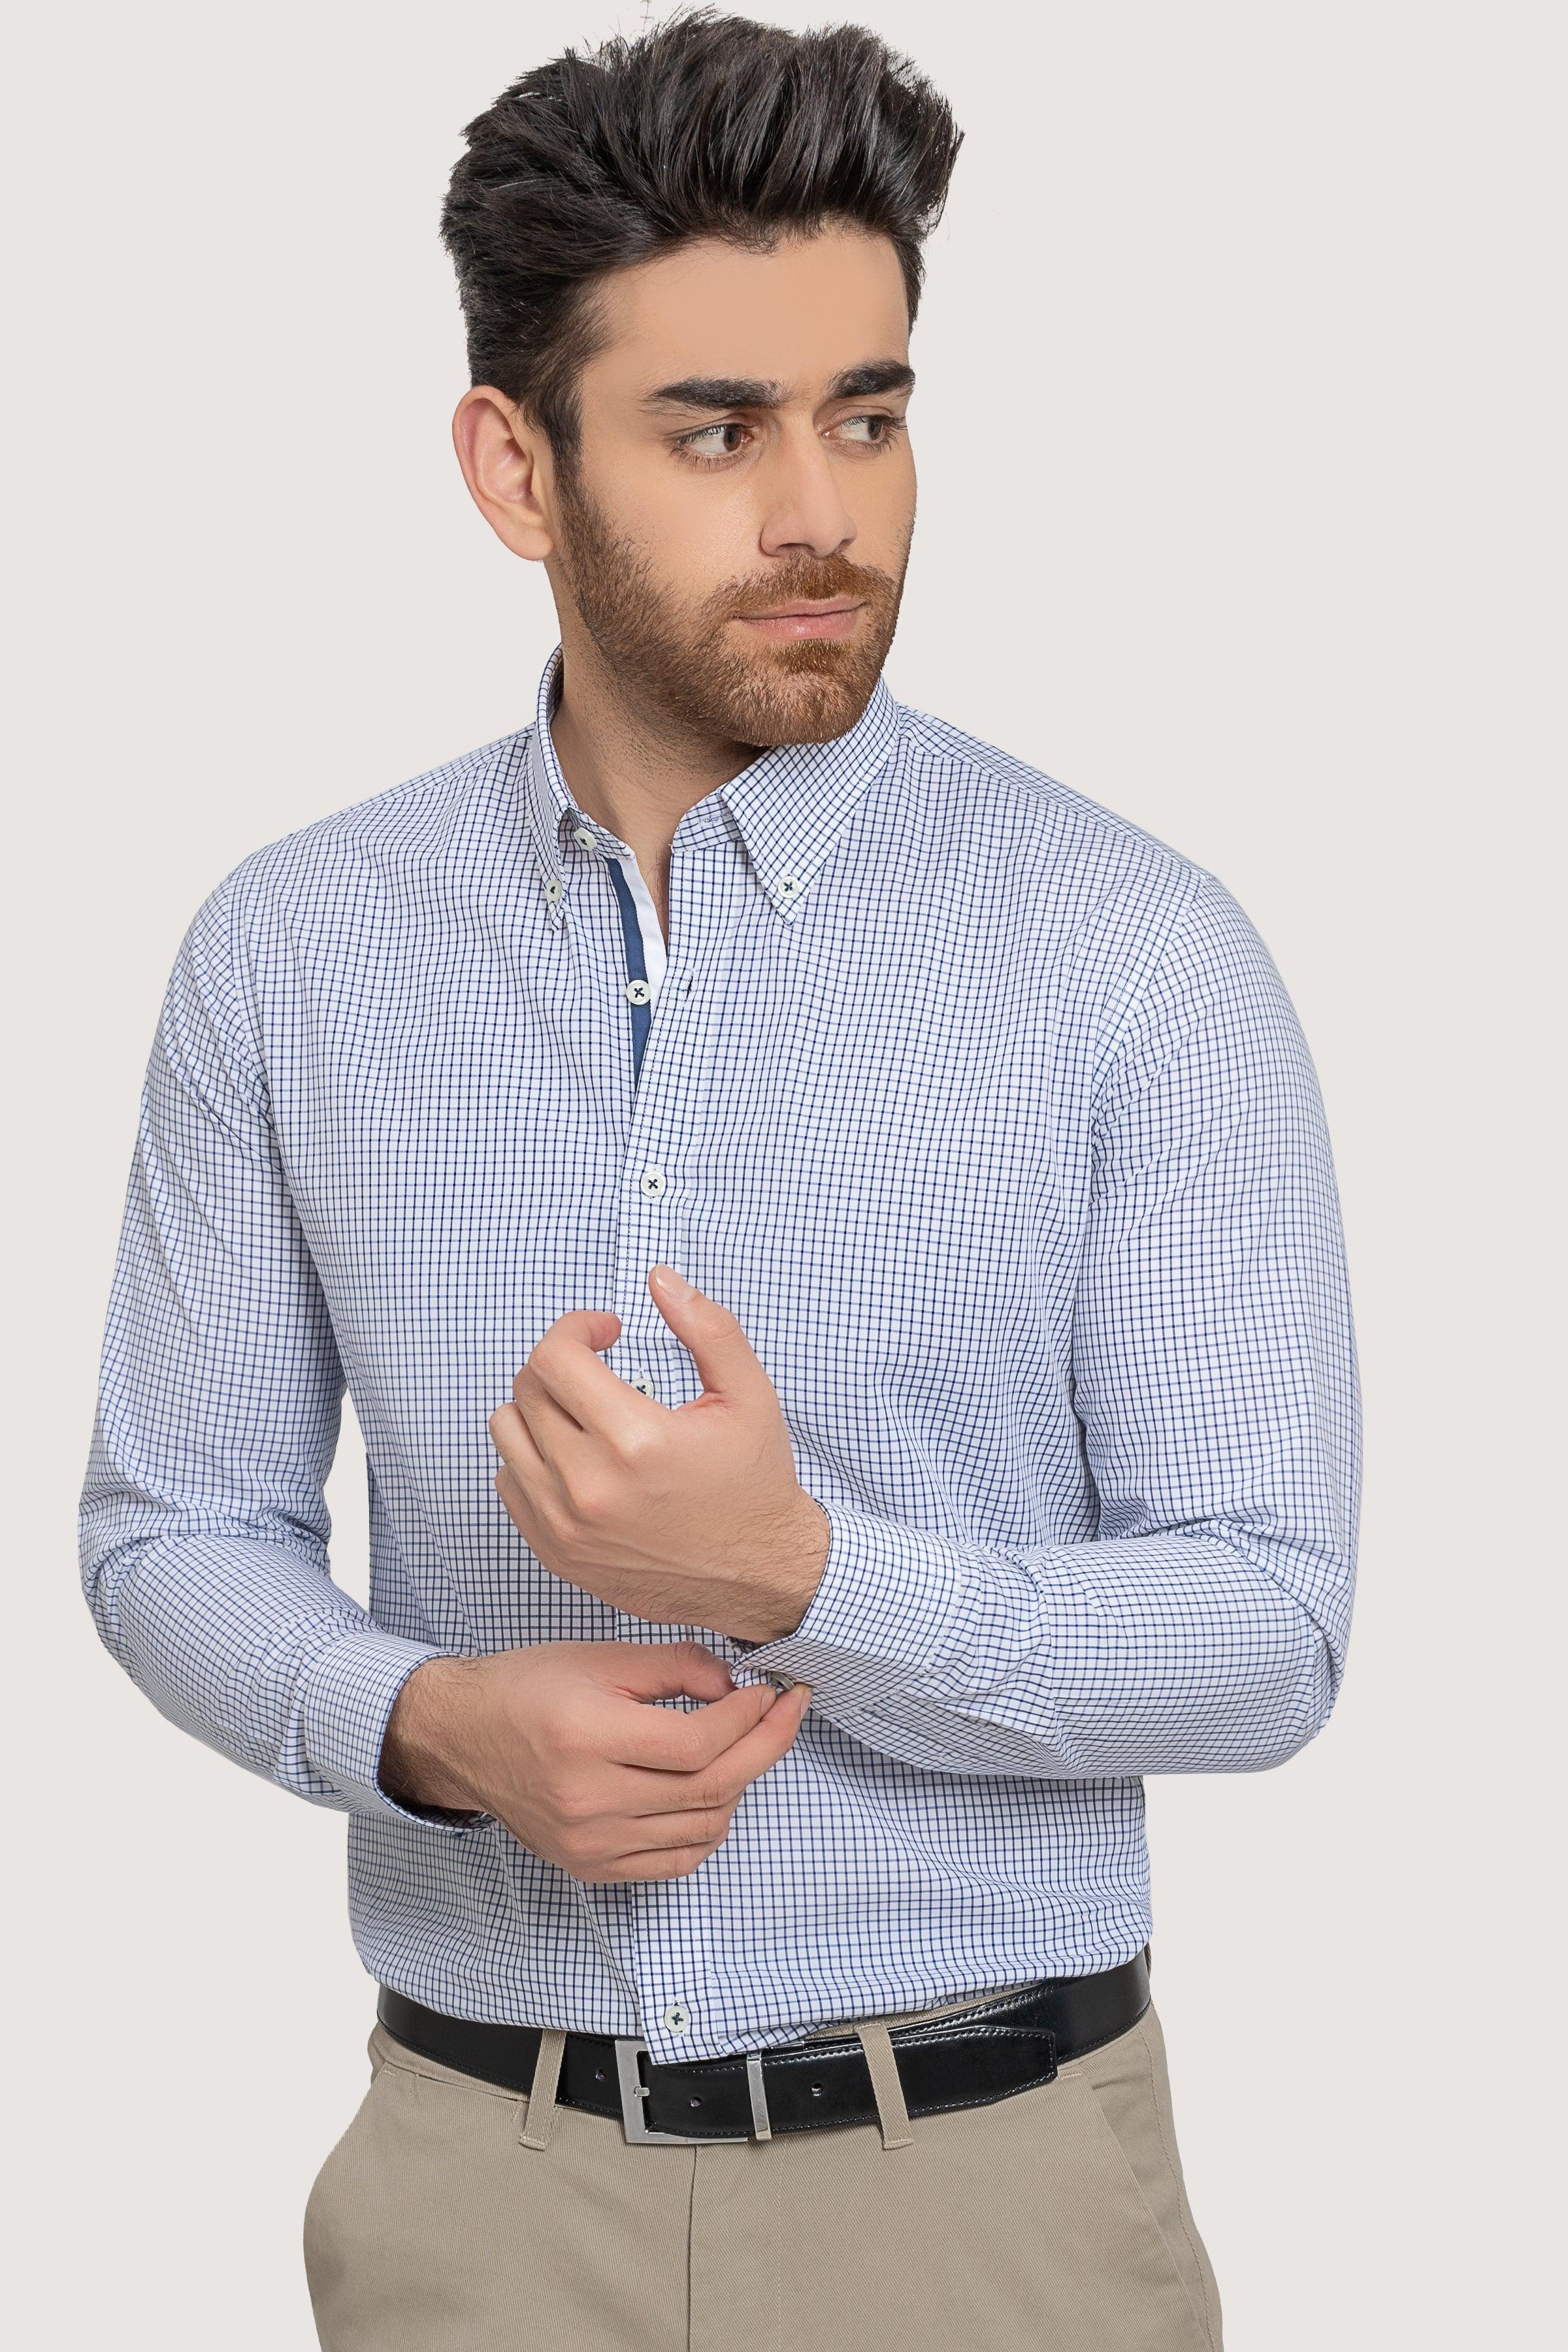 SEMI FORMAL OFF WHITE NAVY CHECK at Charcoal Clothing